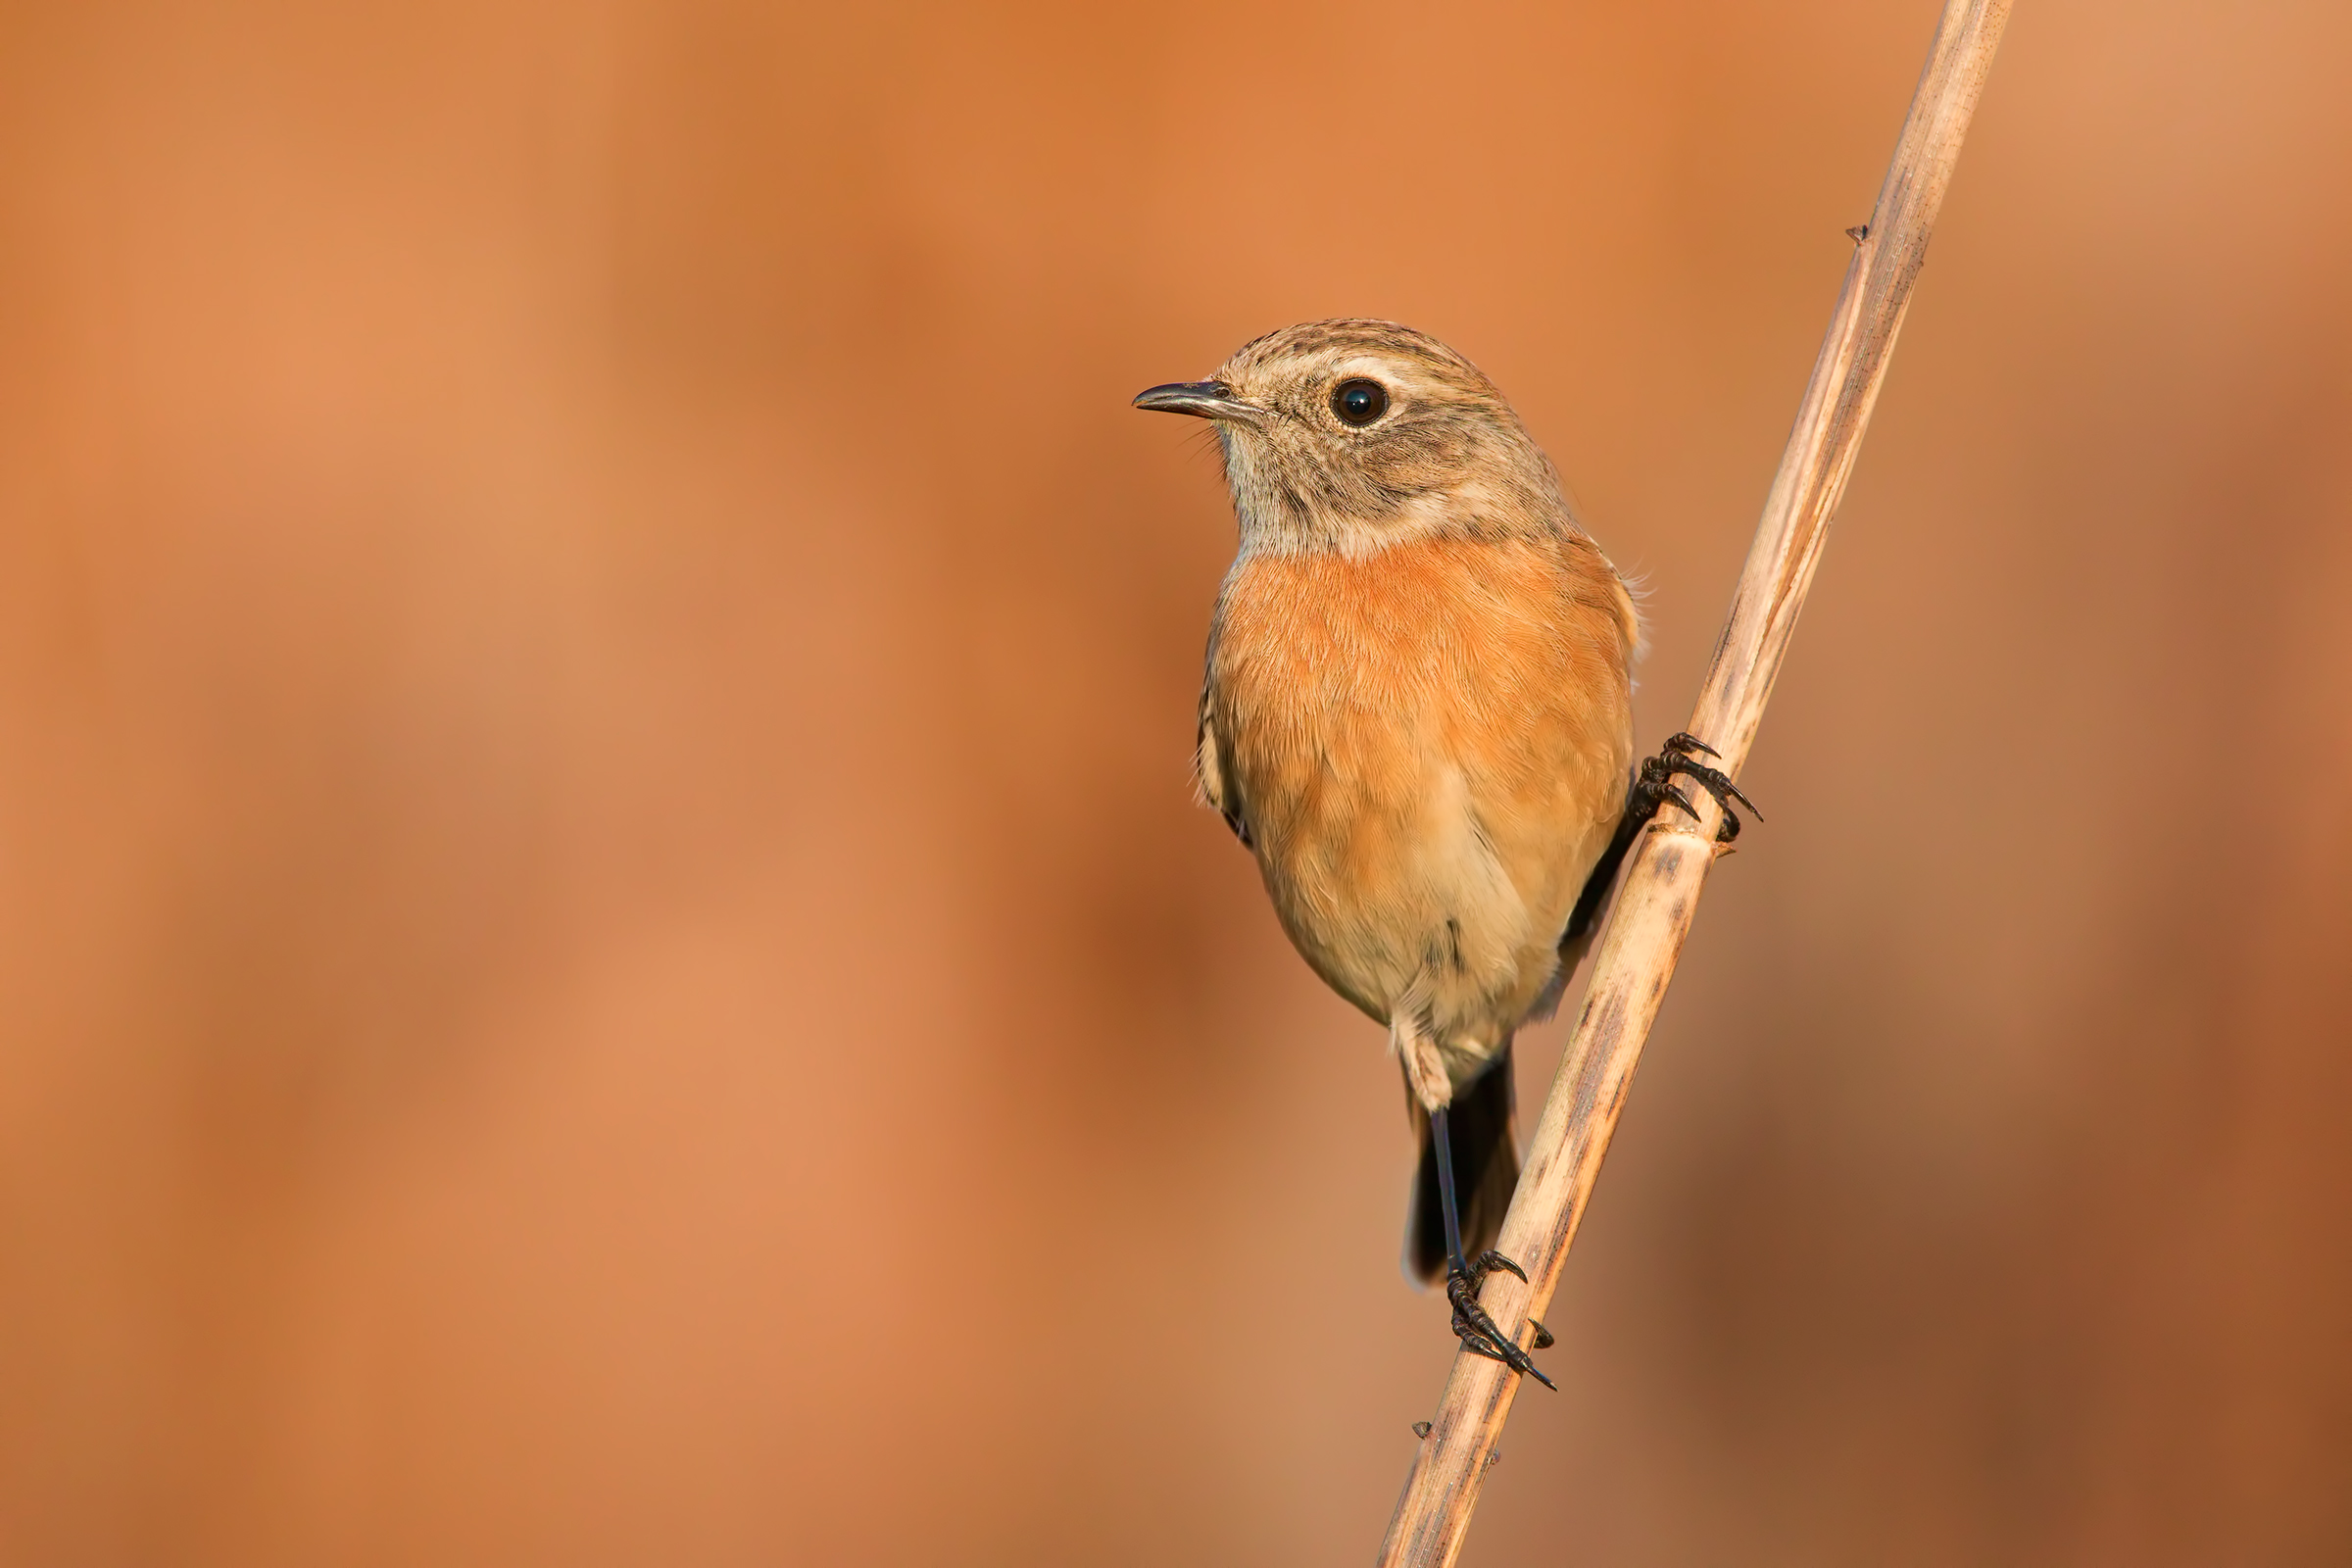 Stonechat at sunset...